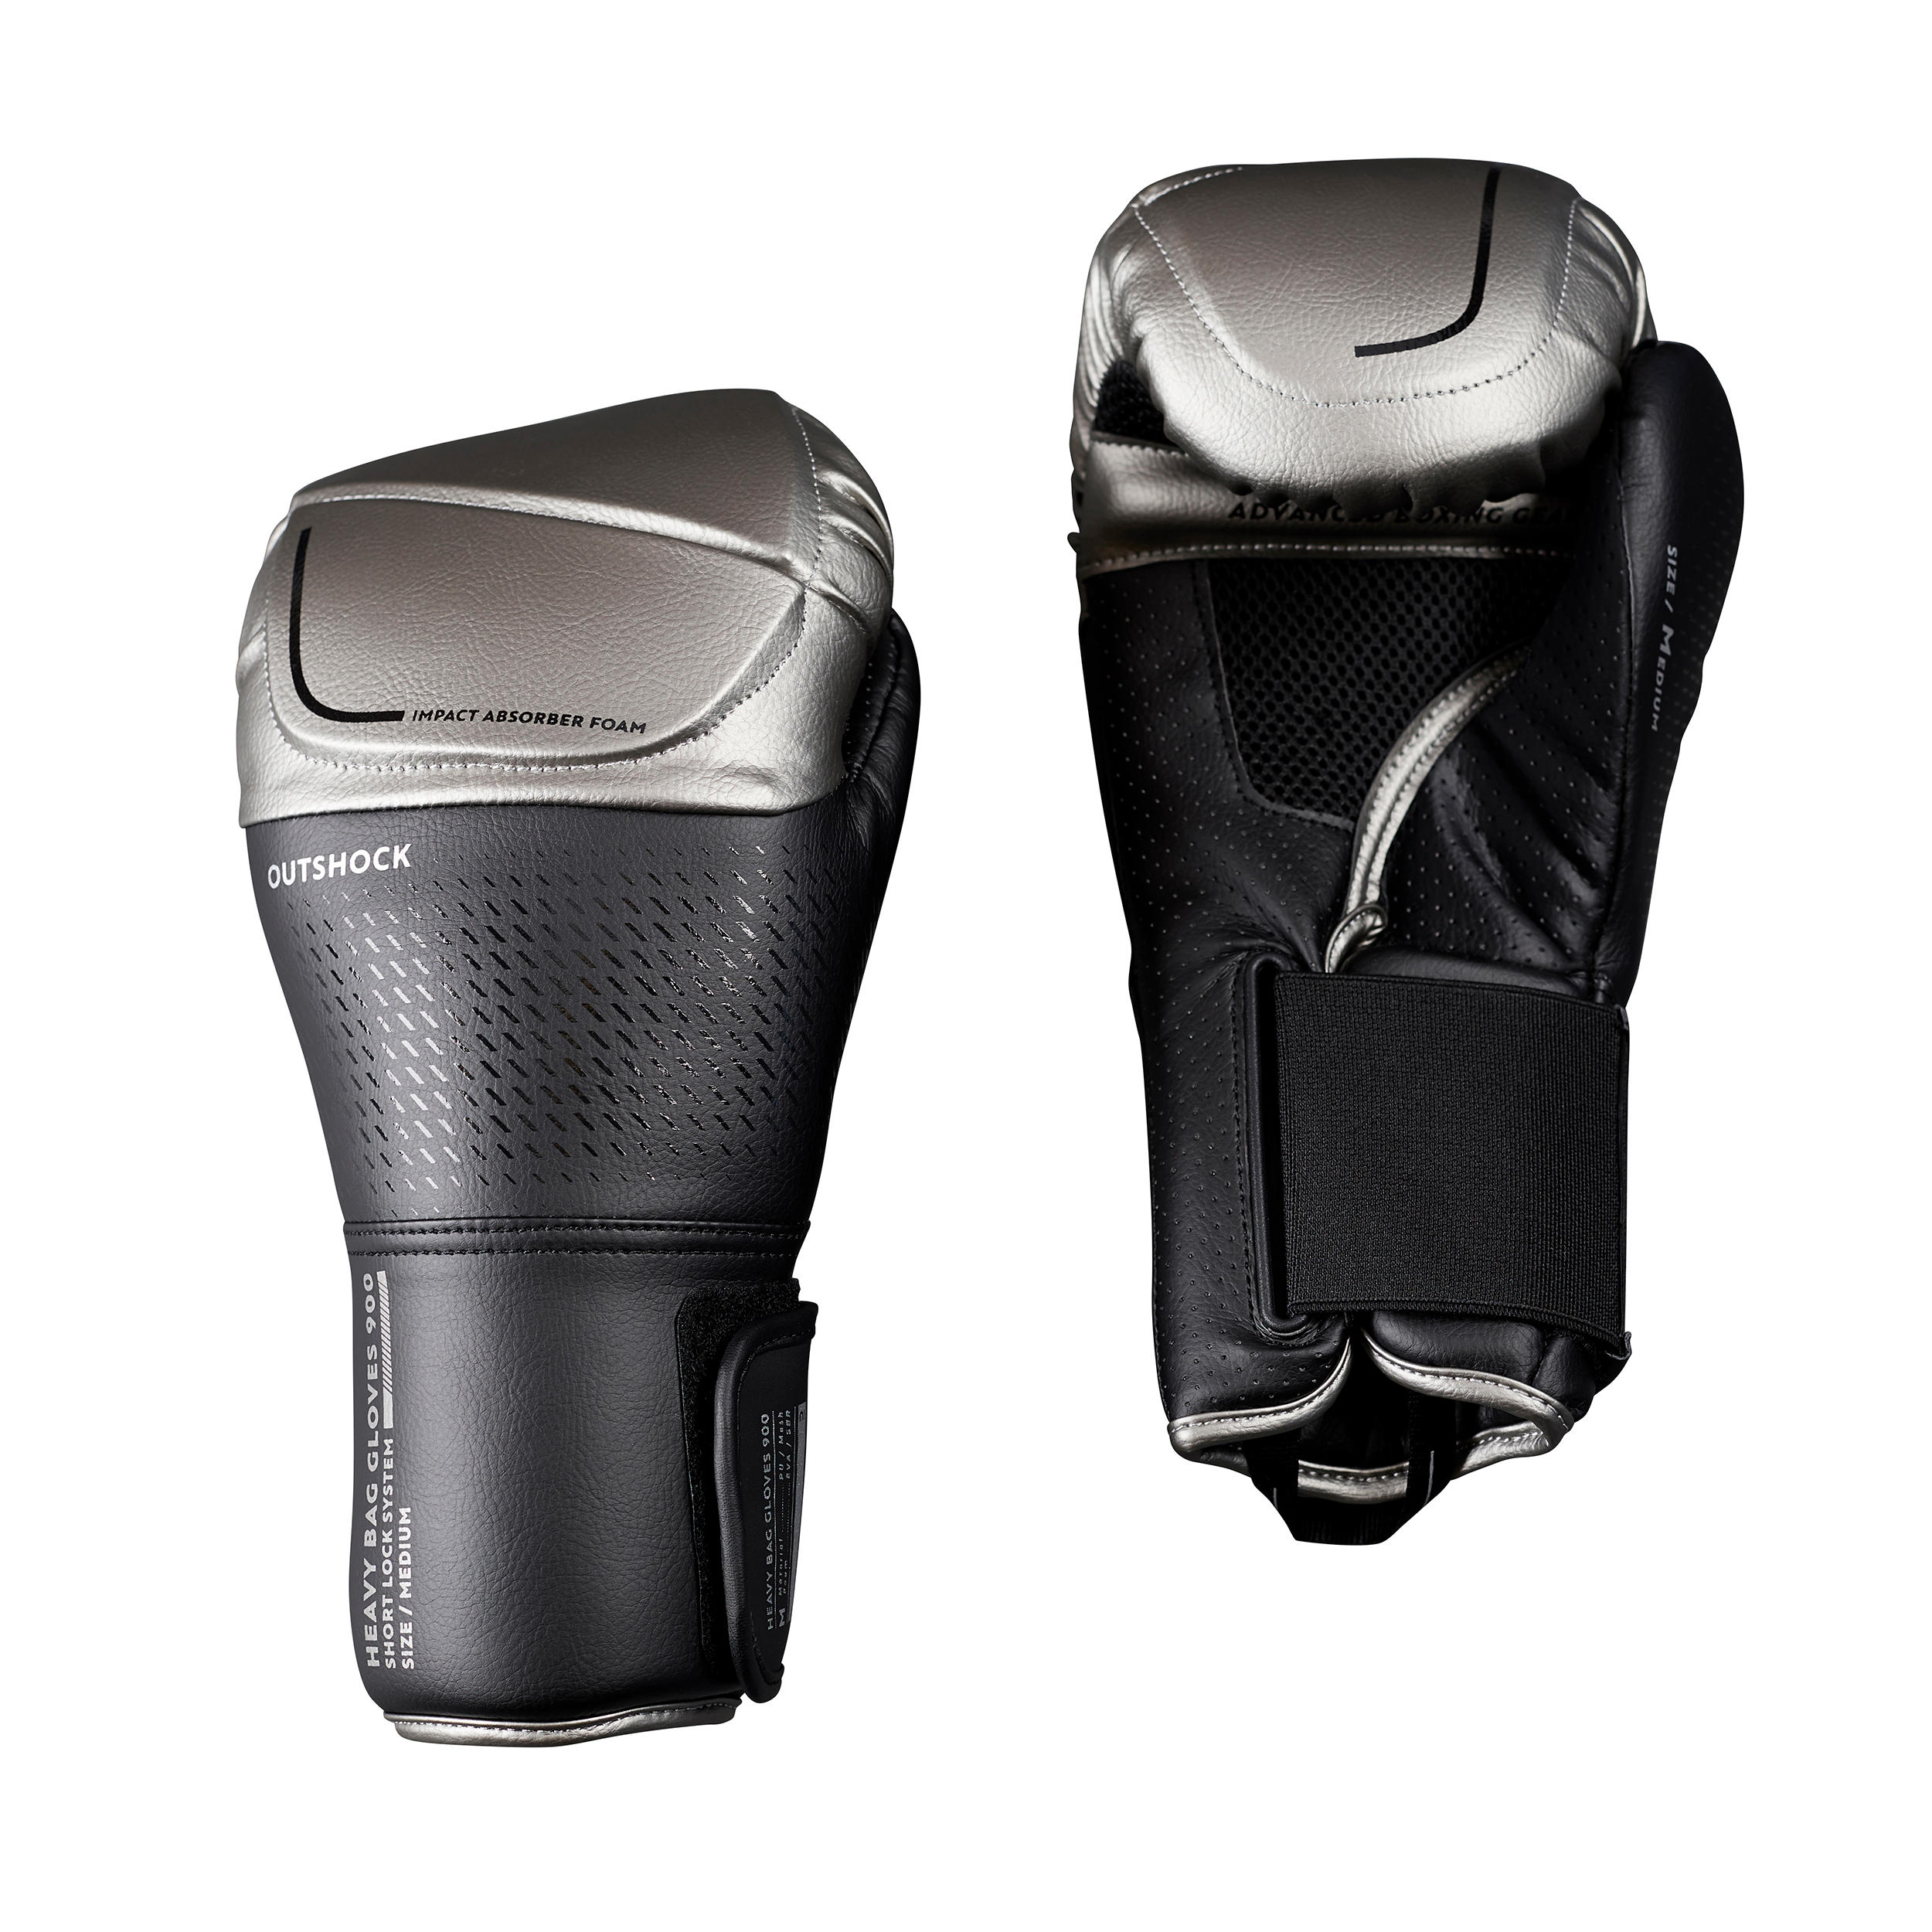 Buy PU Muay Thai Training Punching Bag Mitts Sparring Boxing Gym Gloves  Black Online at Low Prices in India - Amazon.in